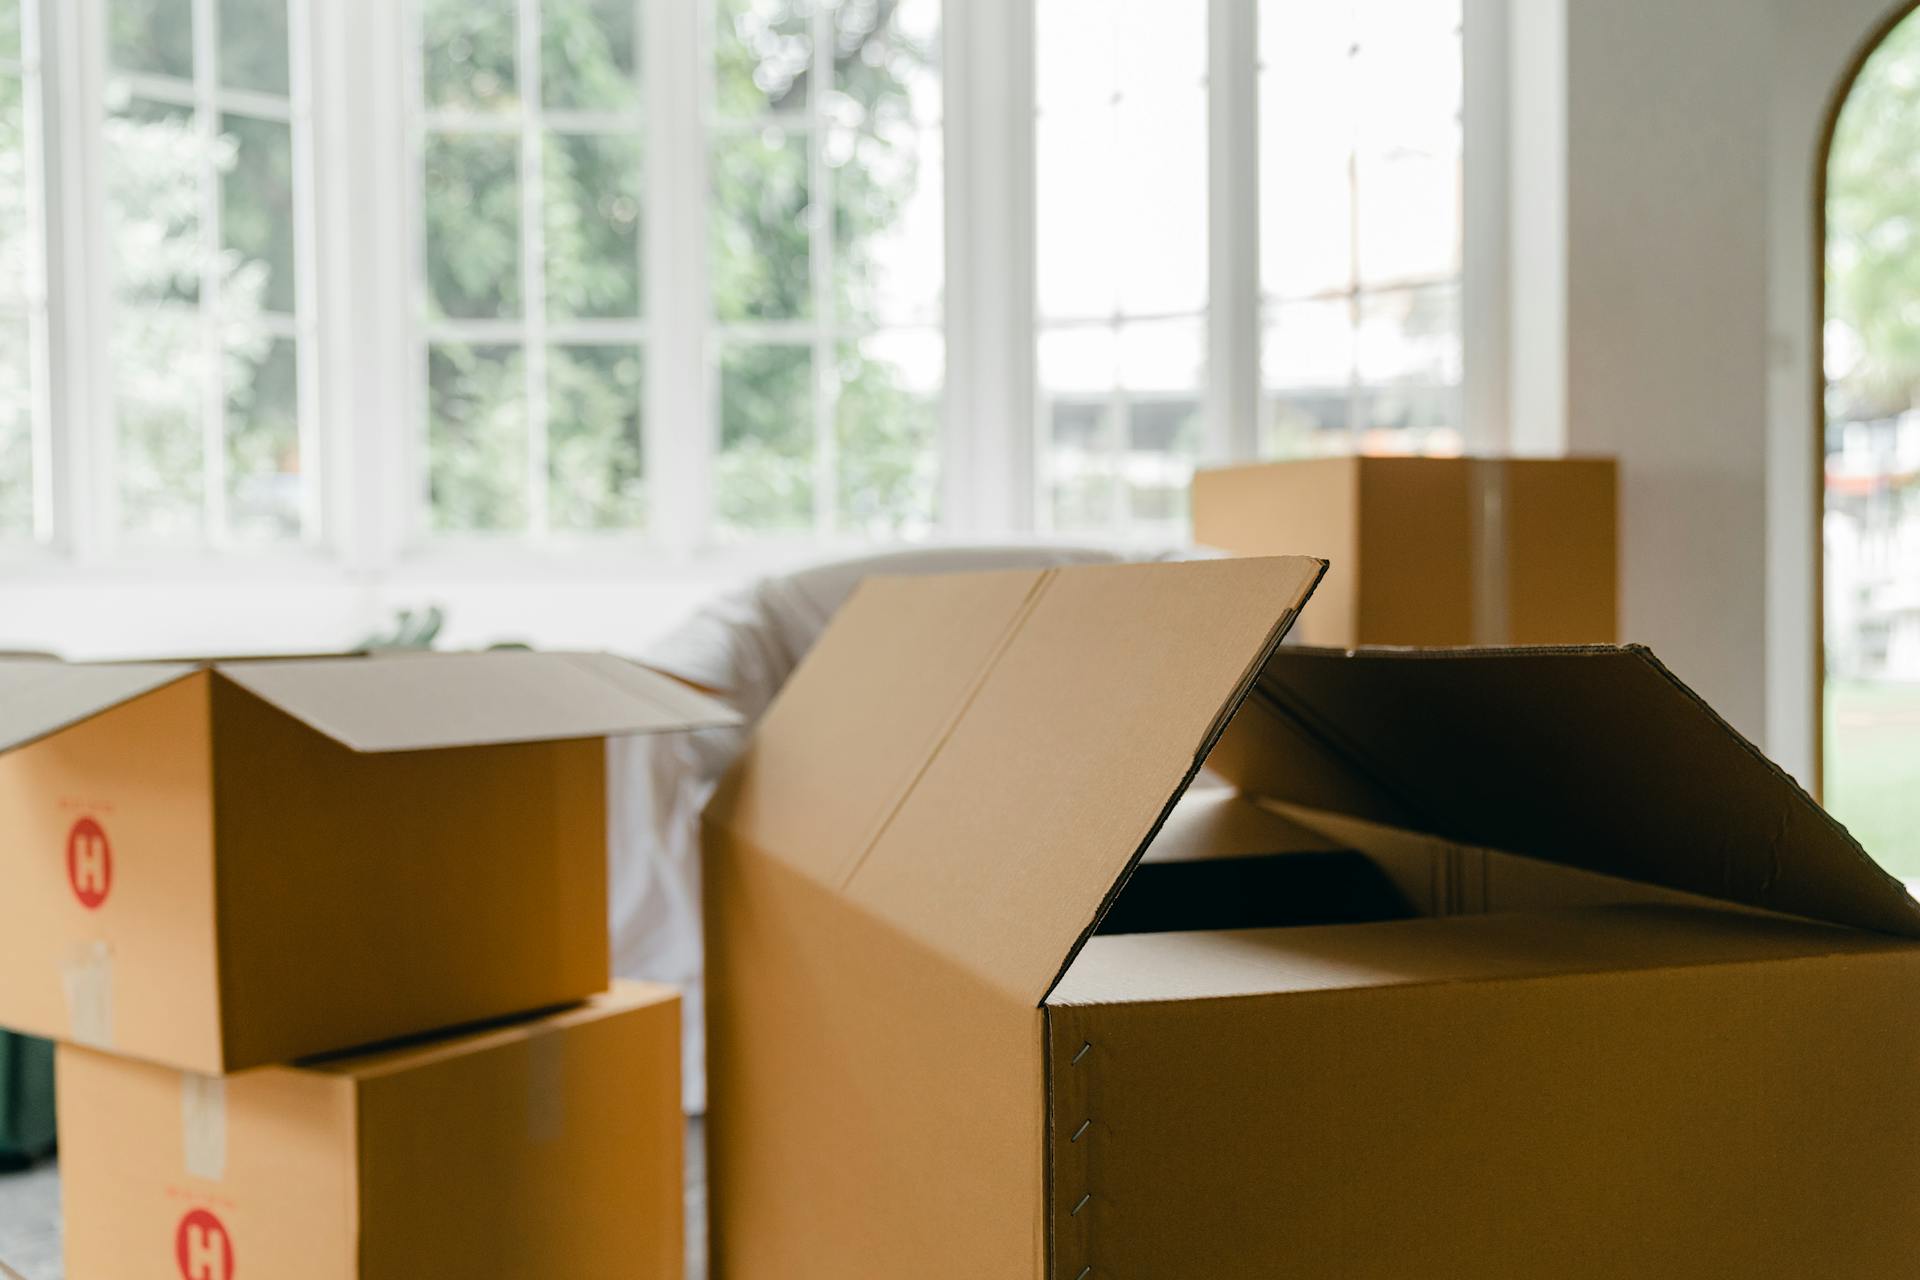 Boxes inside a house | Source: Pexels